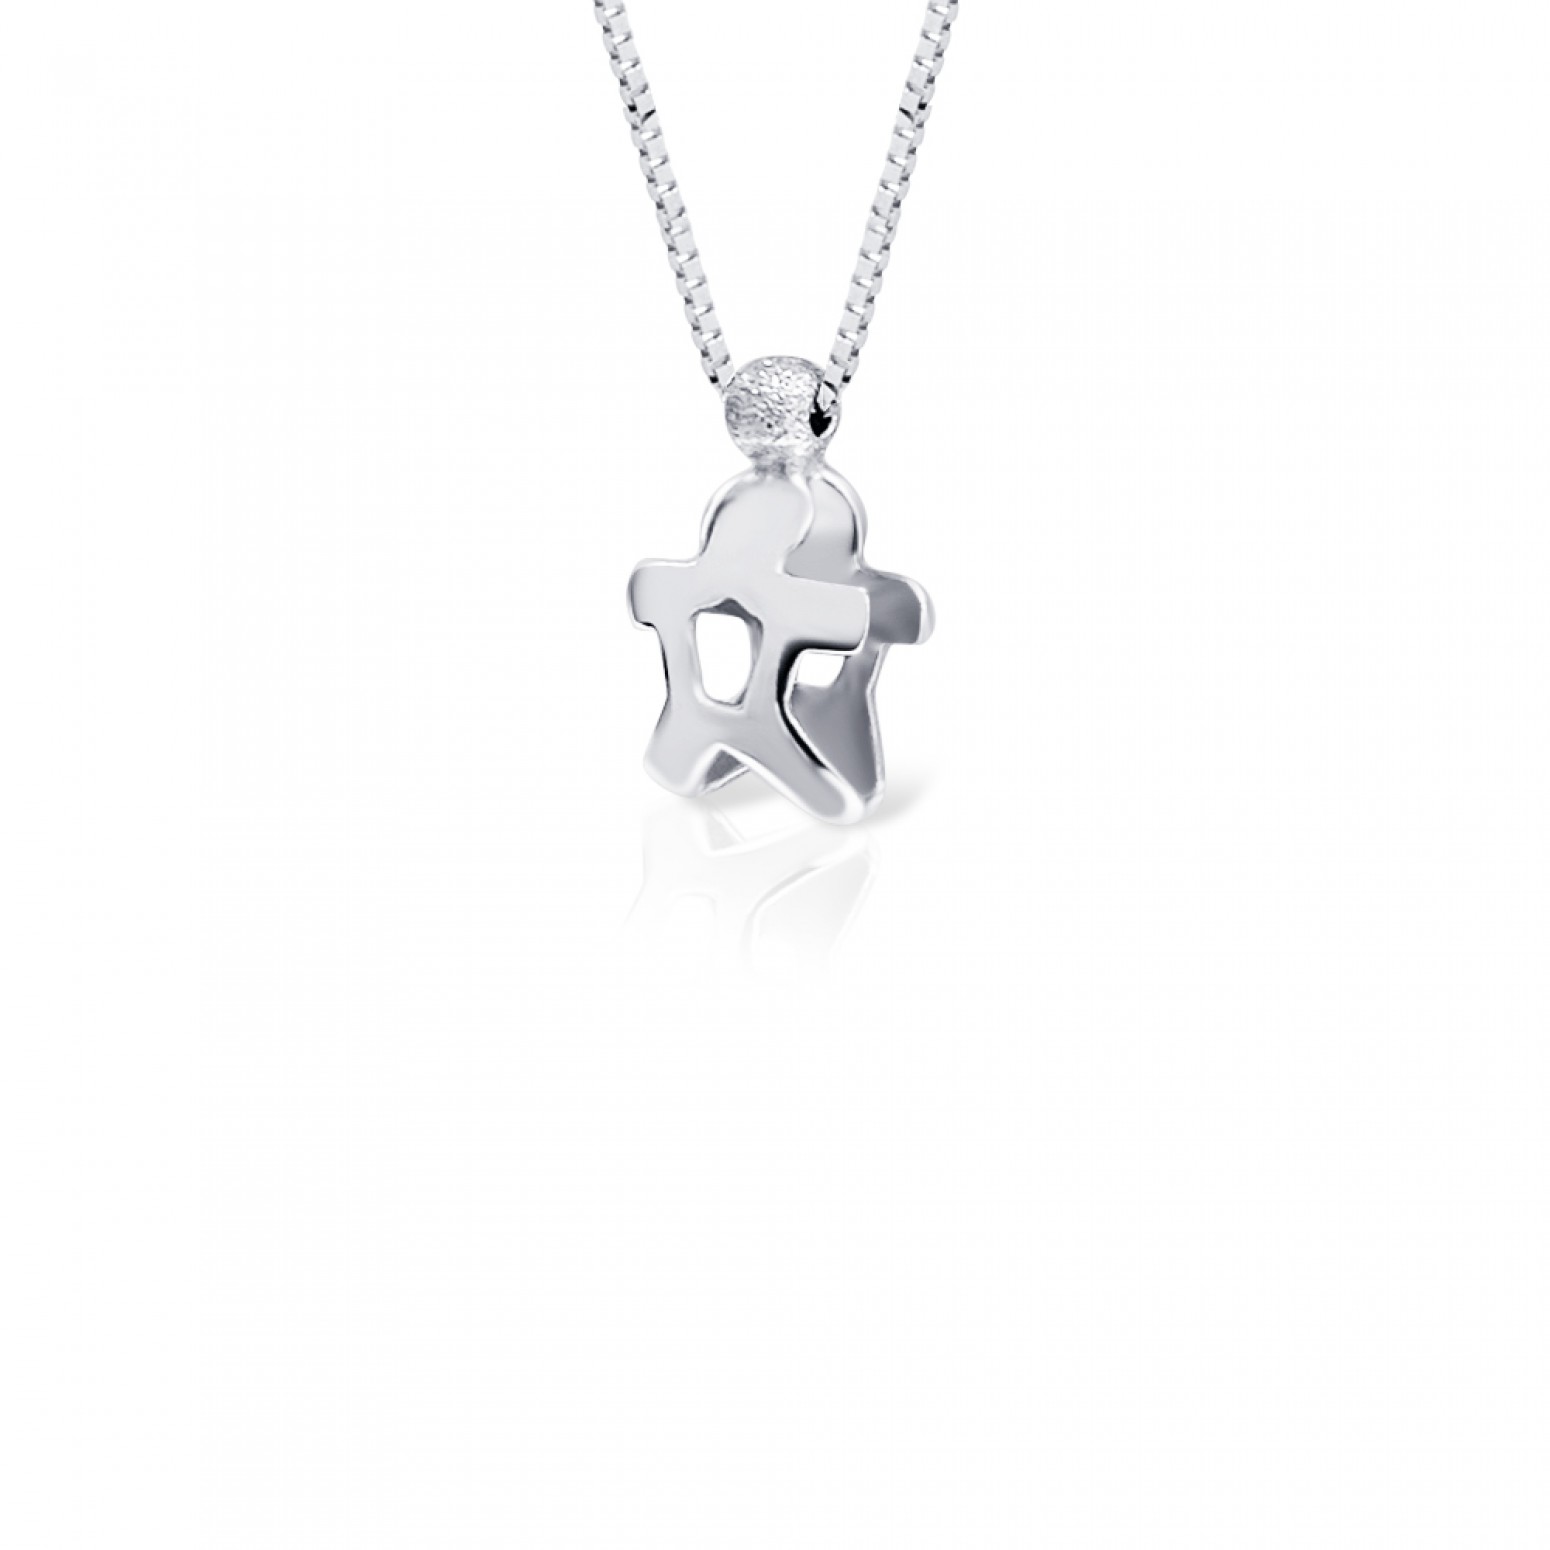 Necklace for baby and mum with kid, Κ14 white gold, ko1420 NECKLACES Κοσμηματα - chrilia.gr